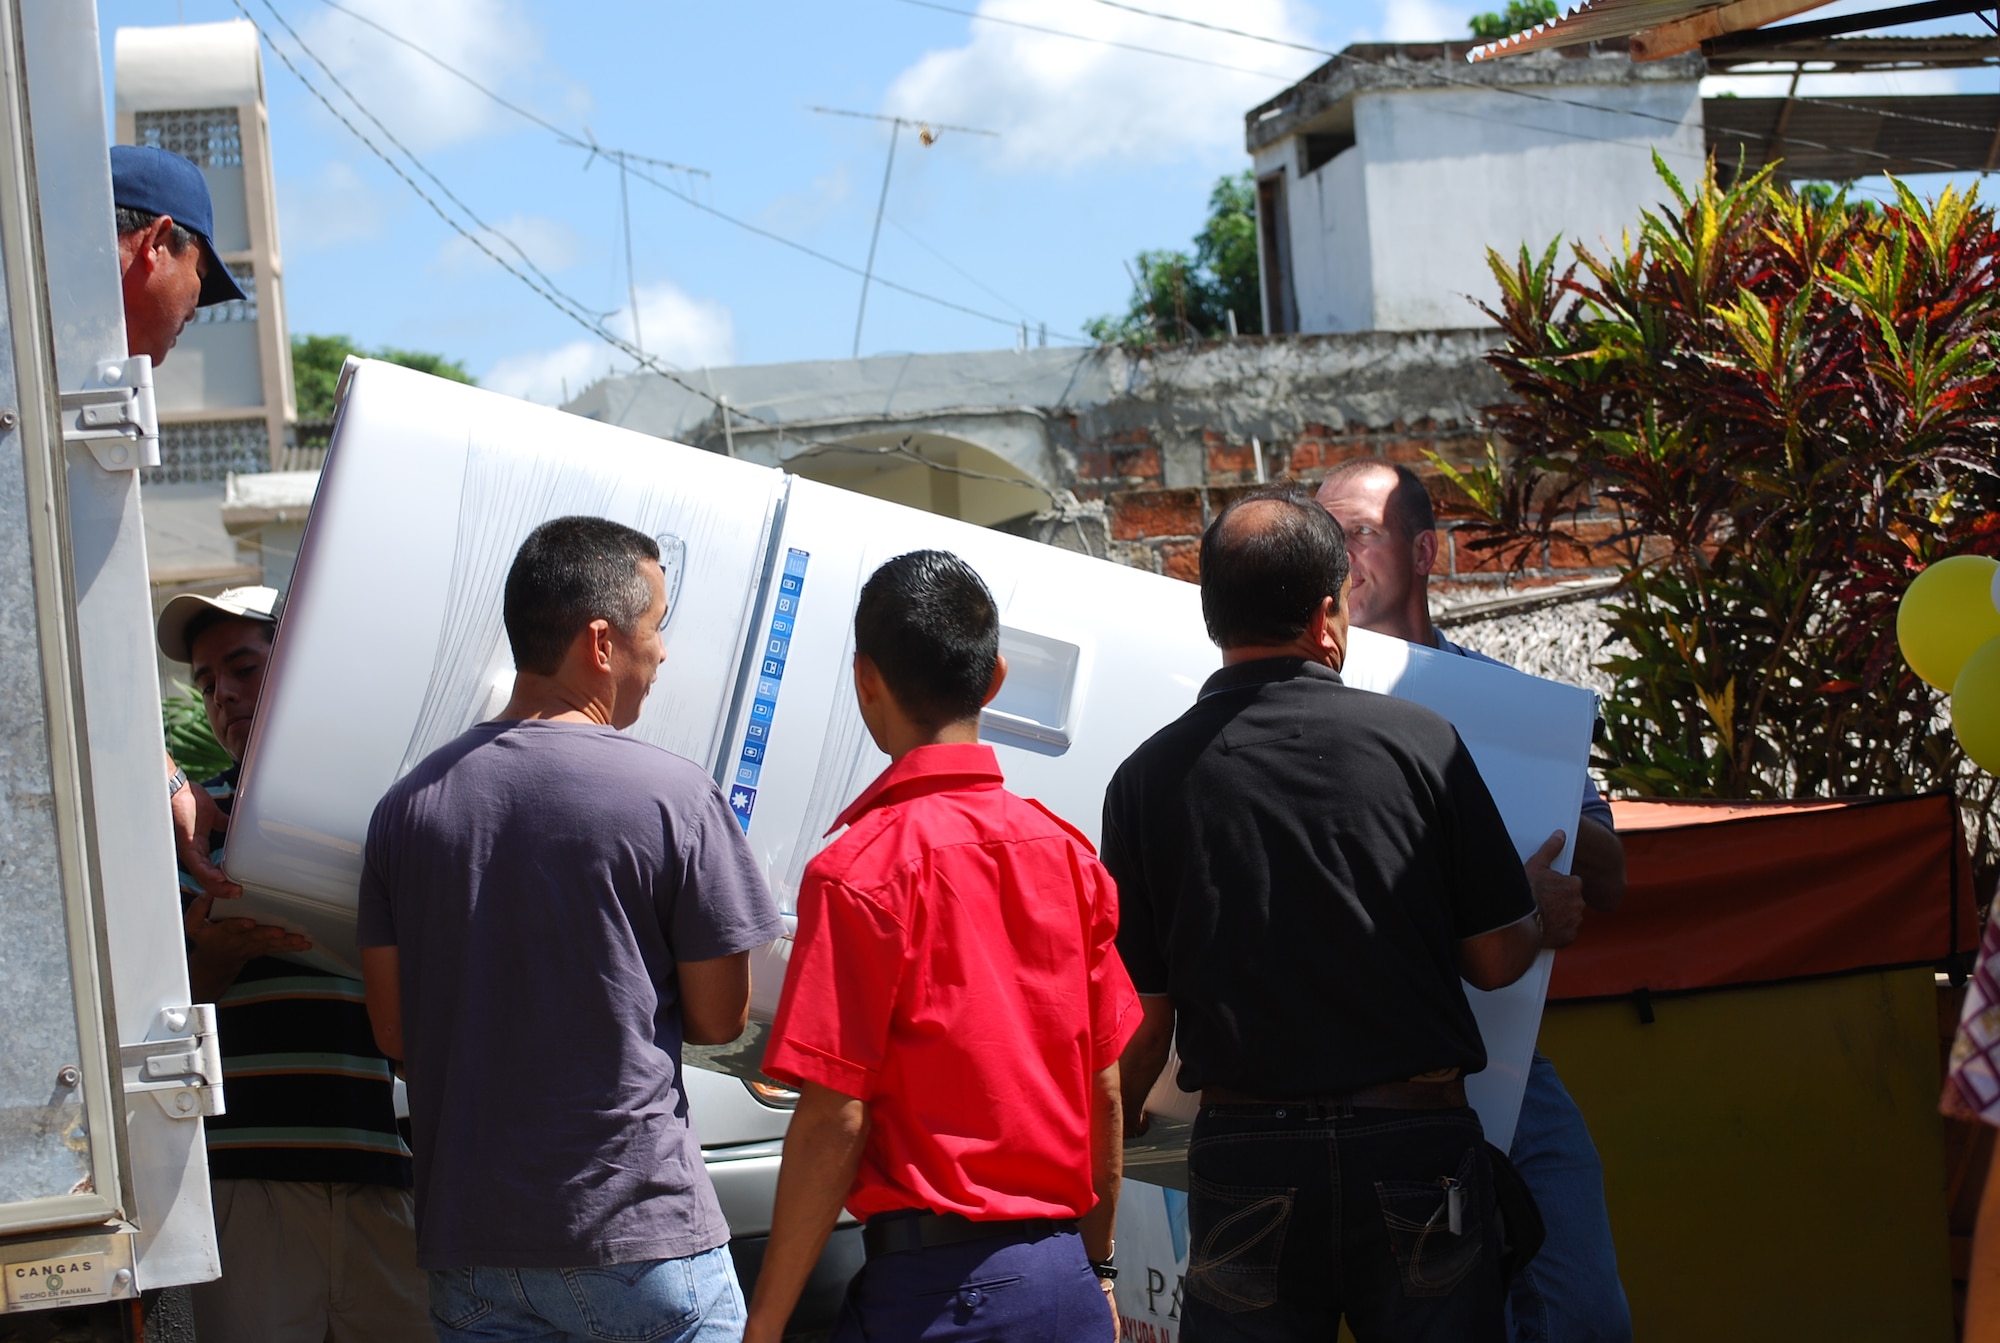 FOL Manta personnel unload a refrigerator and other materials at a Colón, Ecuador, daycare March 13. The delivery of $6,000-worth of materials was made possible through U.S. Southern Command's Humanitarian Assistance Program. HAP partners with local organizations to help strengthen and prosper the region, and aid is typically in the form of infrastructure and education improvements, donations, or disaster preparedness and relief efforts. (U.S. Air Force/1st Lt. Beth Woodward)
